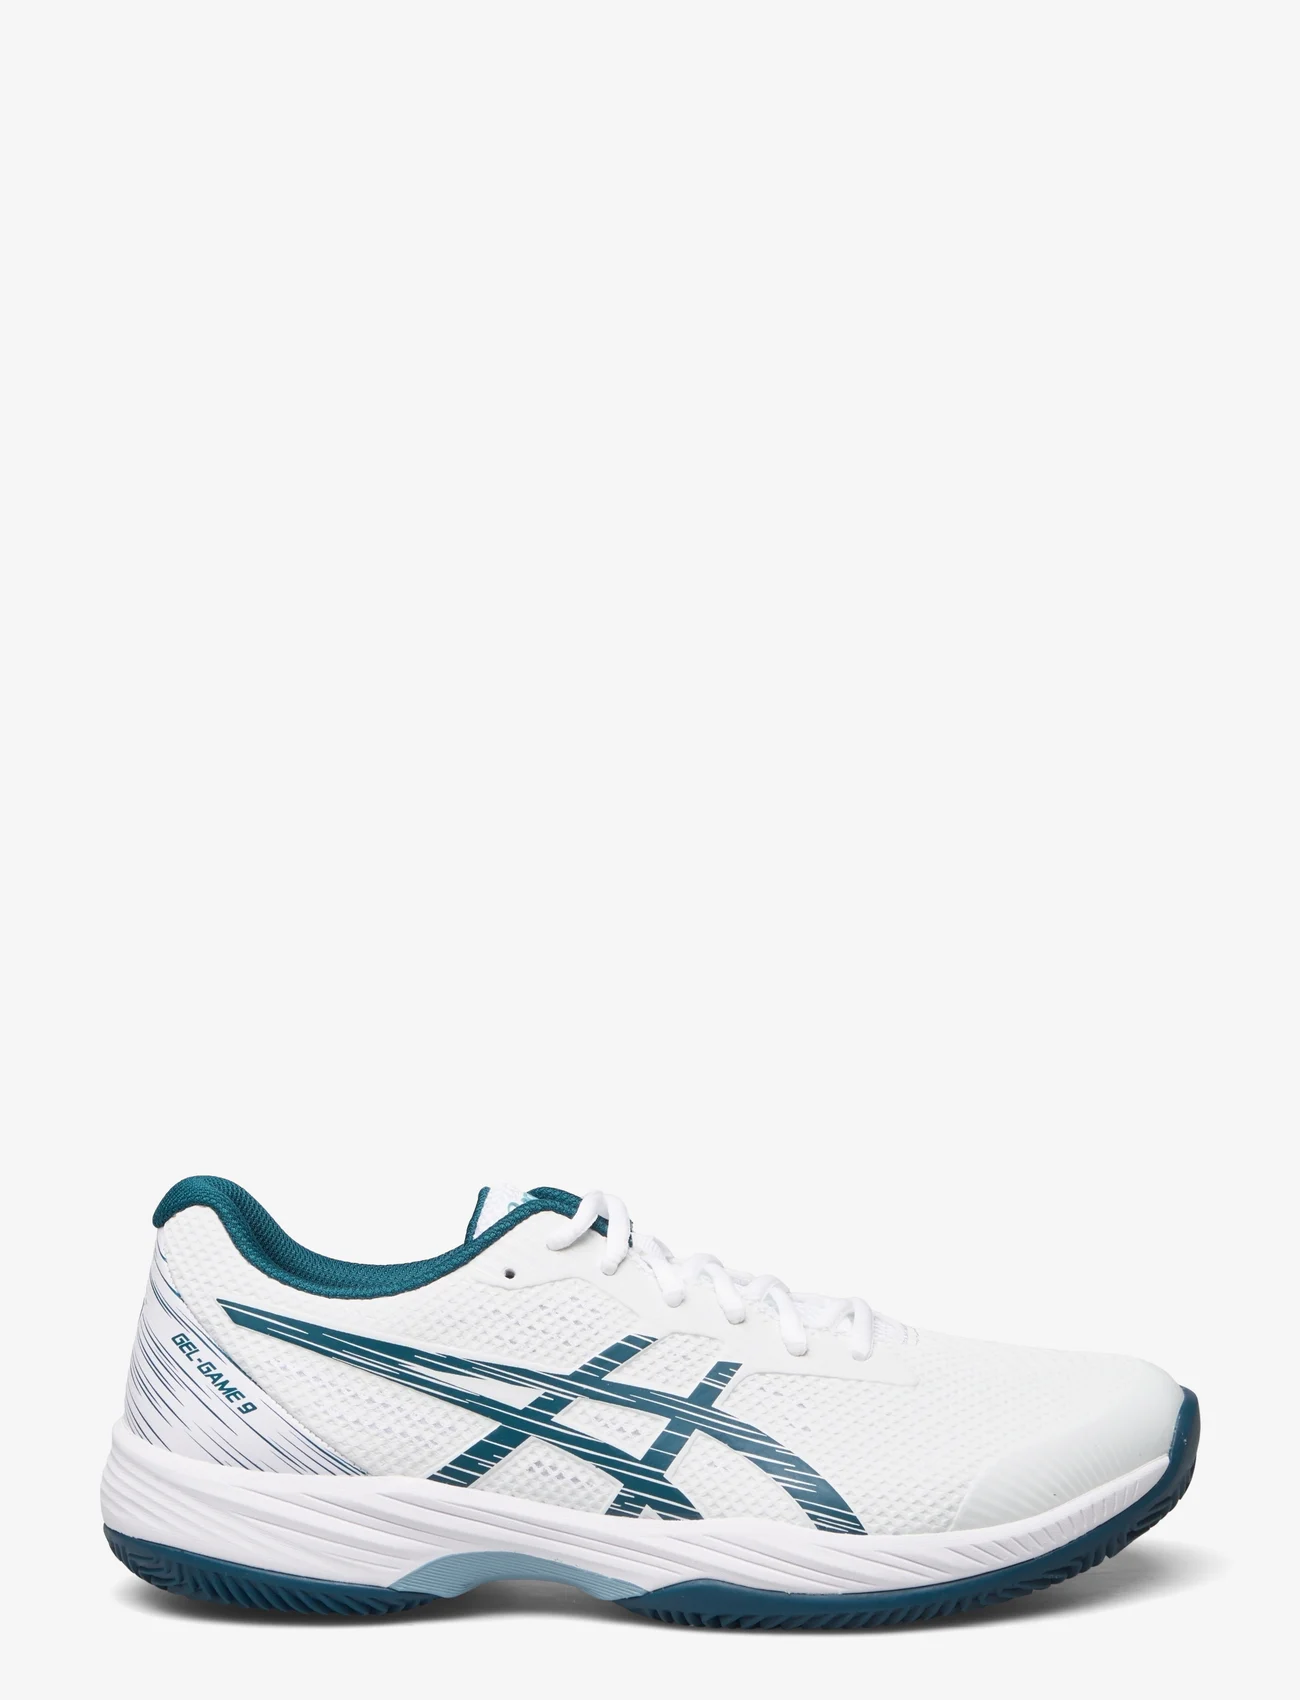 Asics - GEL-GAME 9 CLAY/OC - white/restful teal - 1